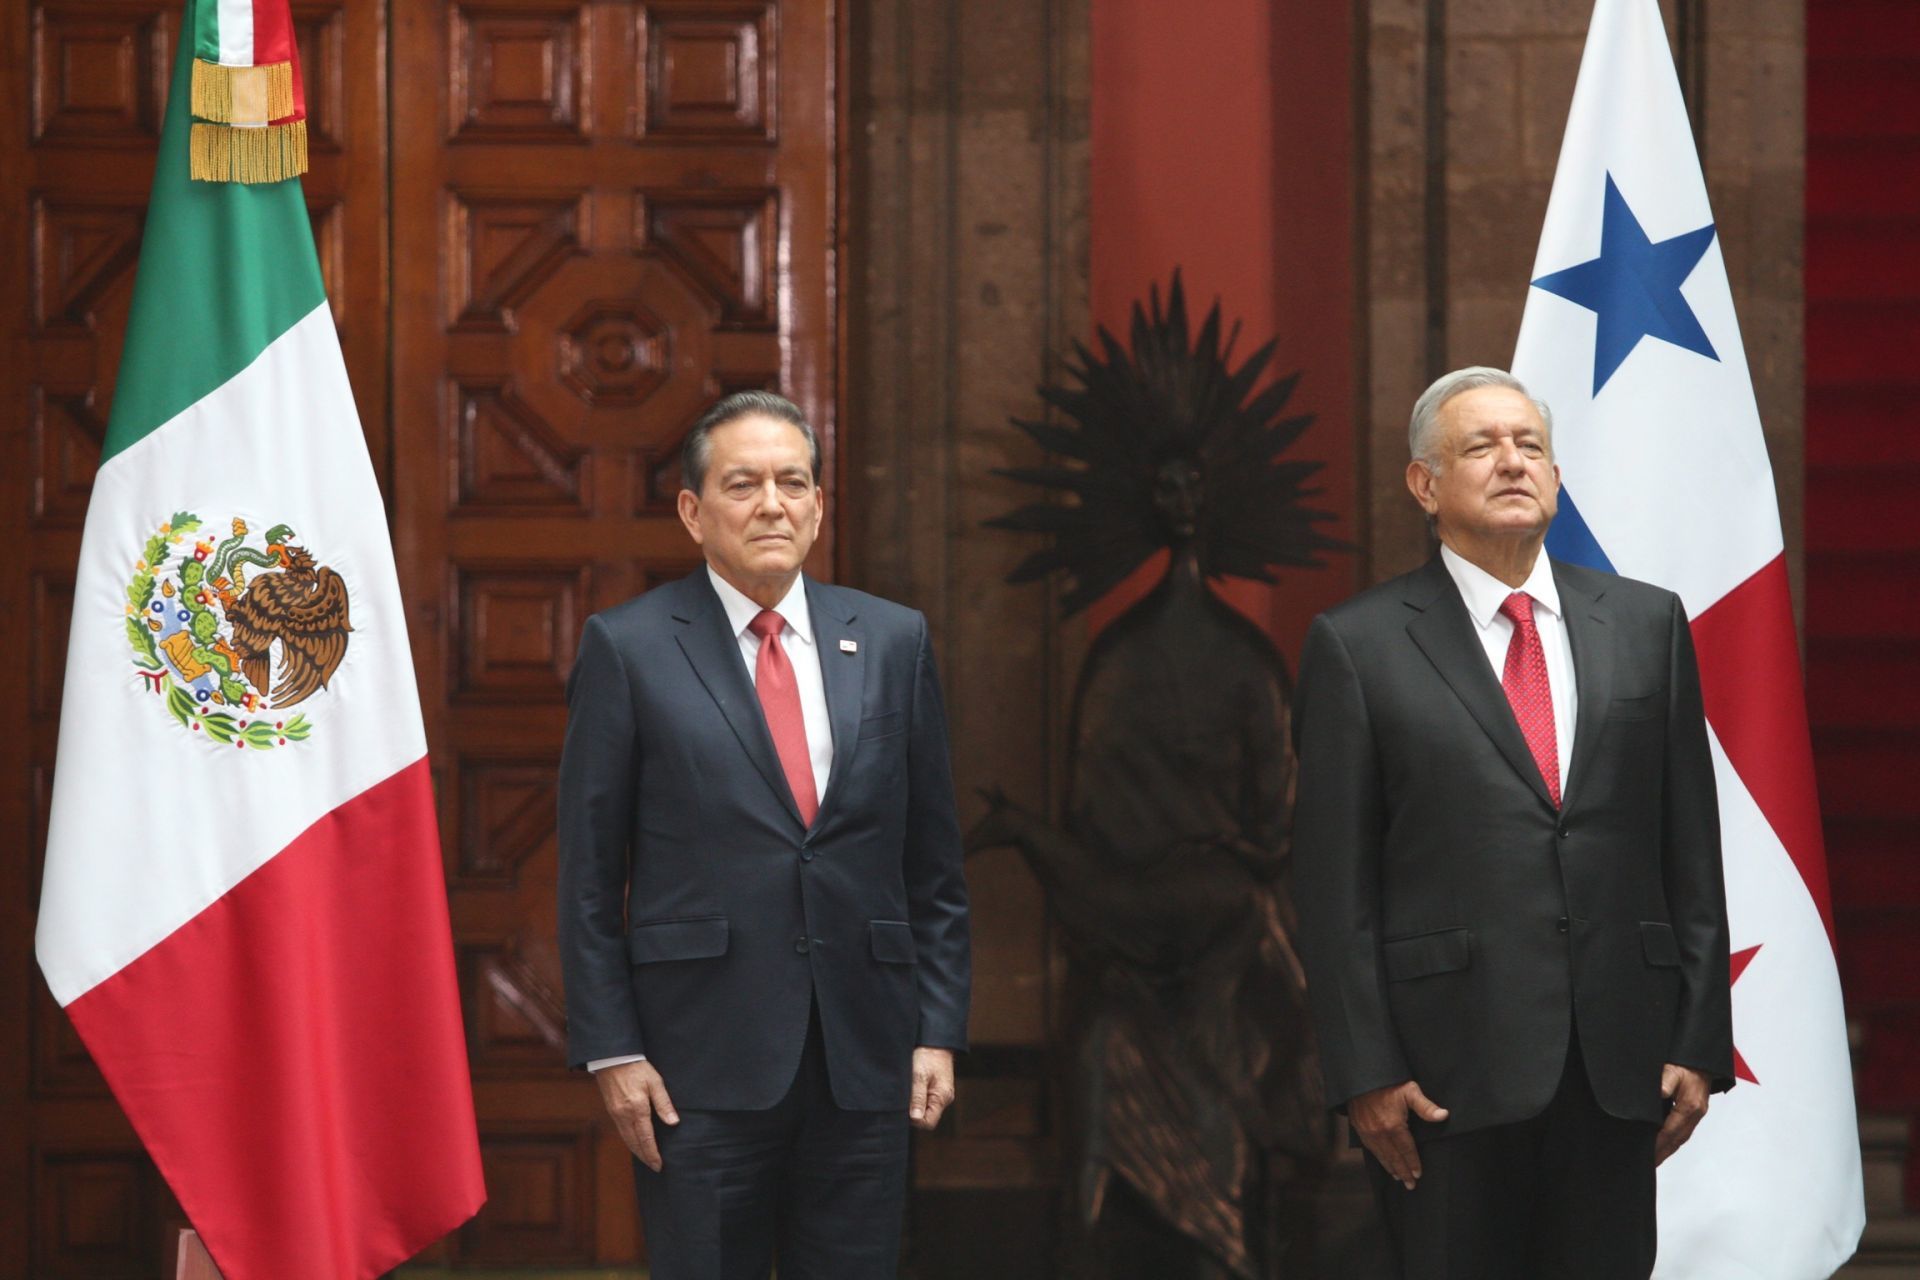 Panama demands respect from AMLO and supports foreign minister who rejected Salmerón